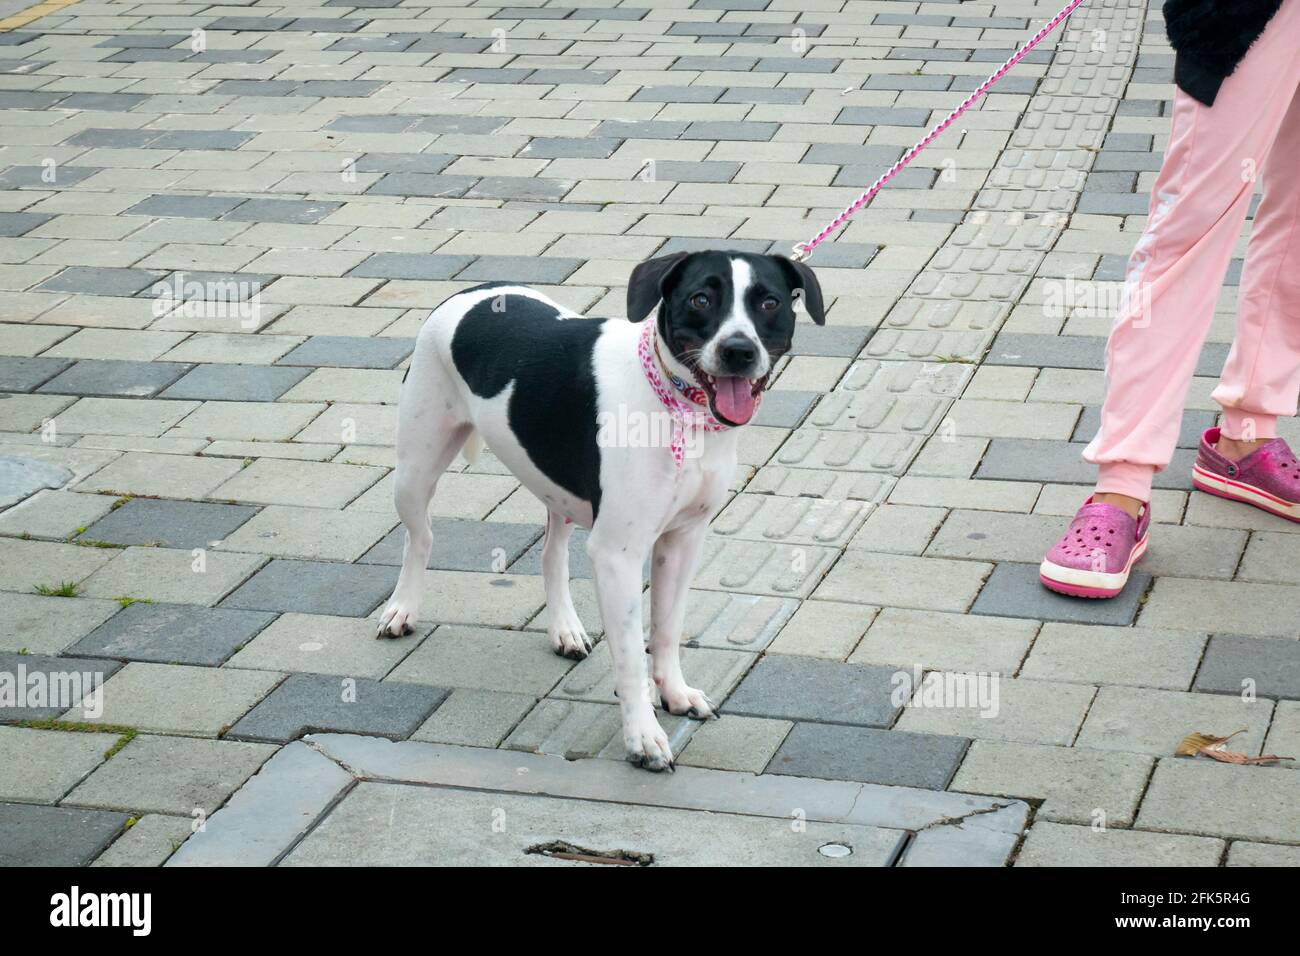 Guatapé, Antioquia, Colombia - April 4 2021: Black and White Mongrel Dog Wearing a Pink Collar and Leash is Panting next to his Mistress who is Dresse Stock Photo